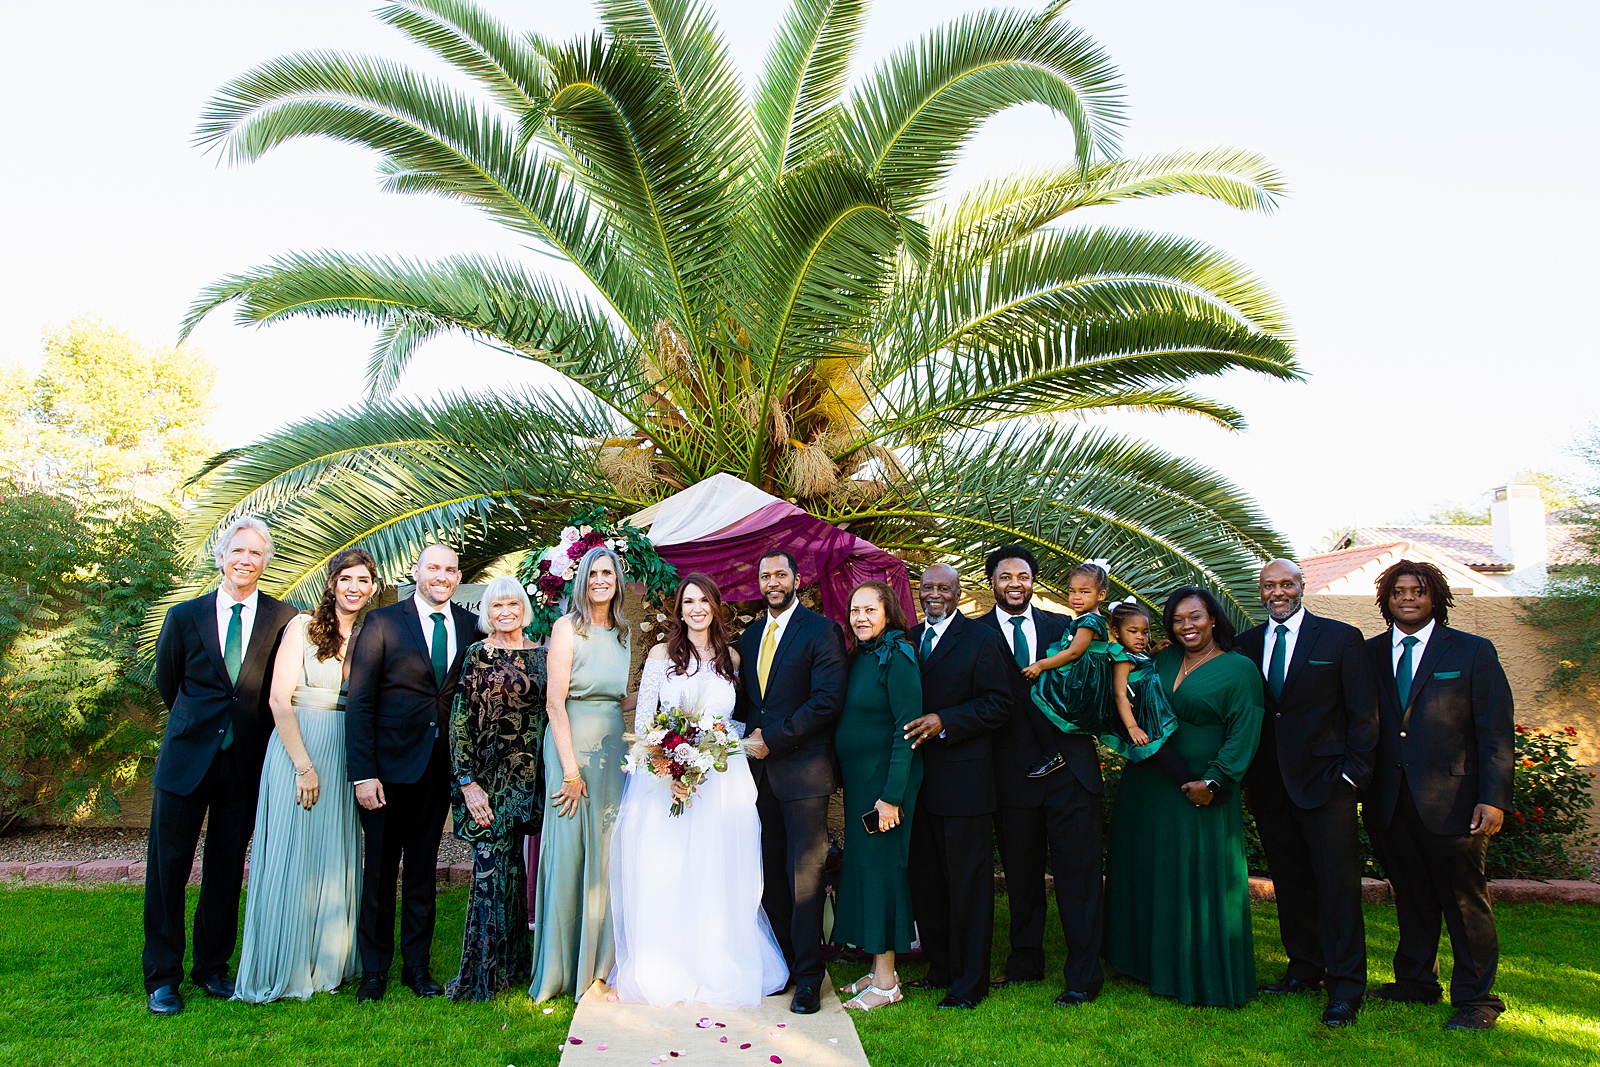 Bride and groom with their family at a Backyard Micro wedding by Arizona wedding photographer PMA Photography.